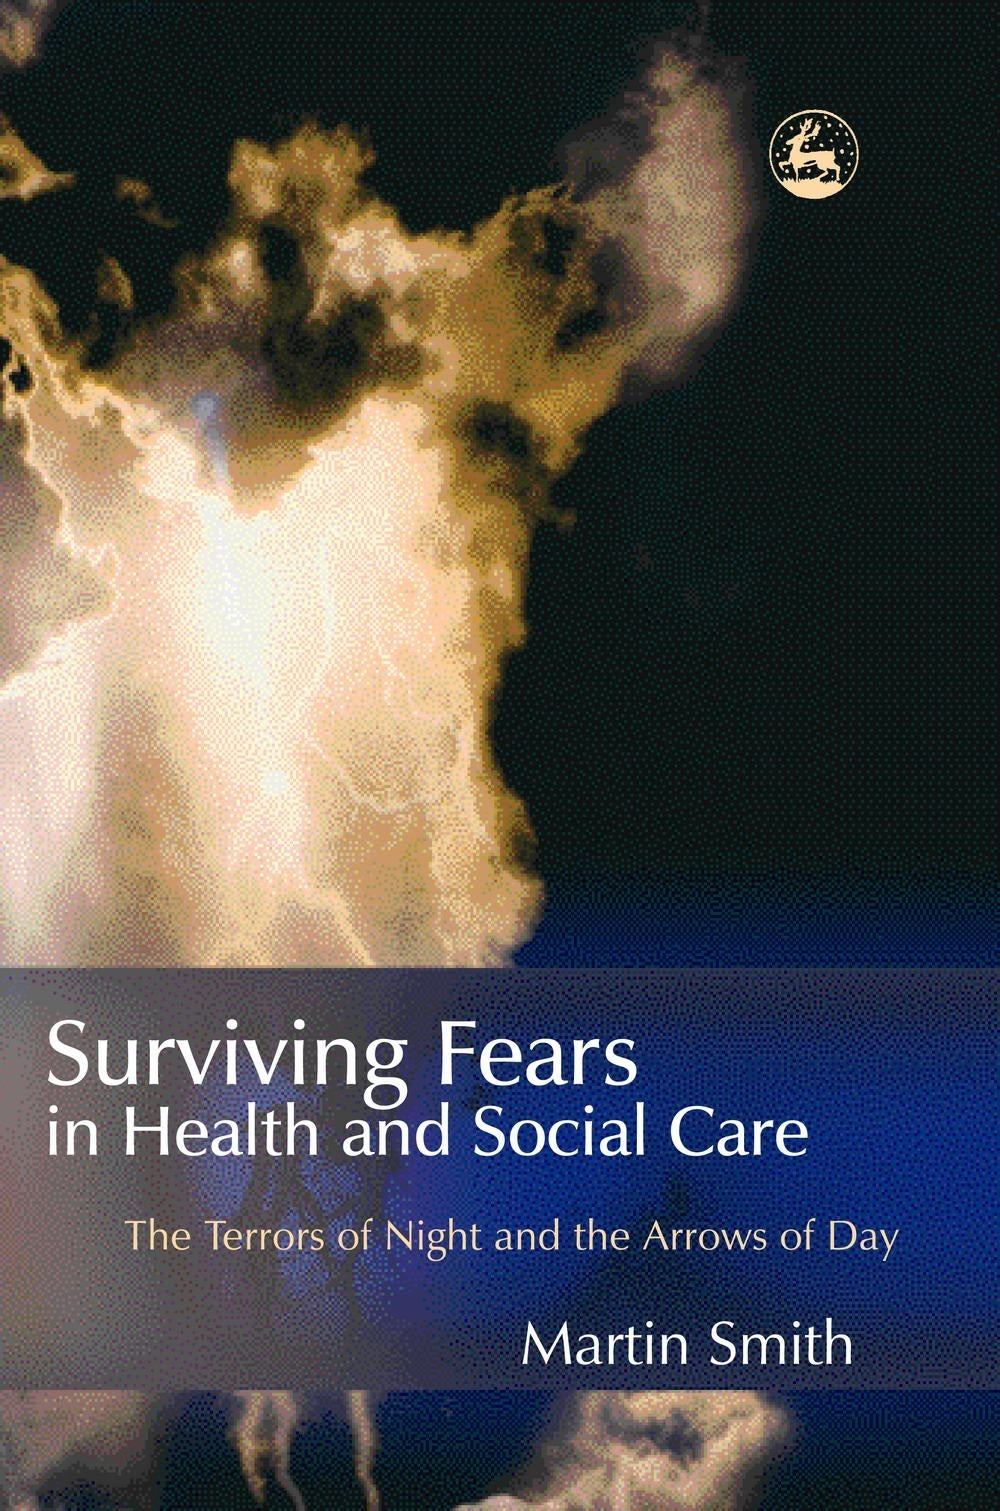 Surviving Fears in Health and Social Care by Martin Smith